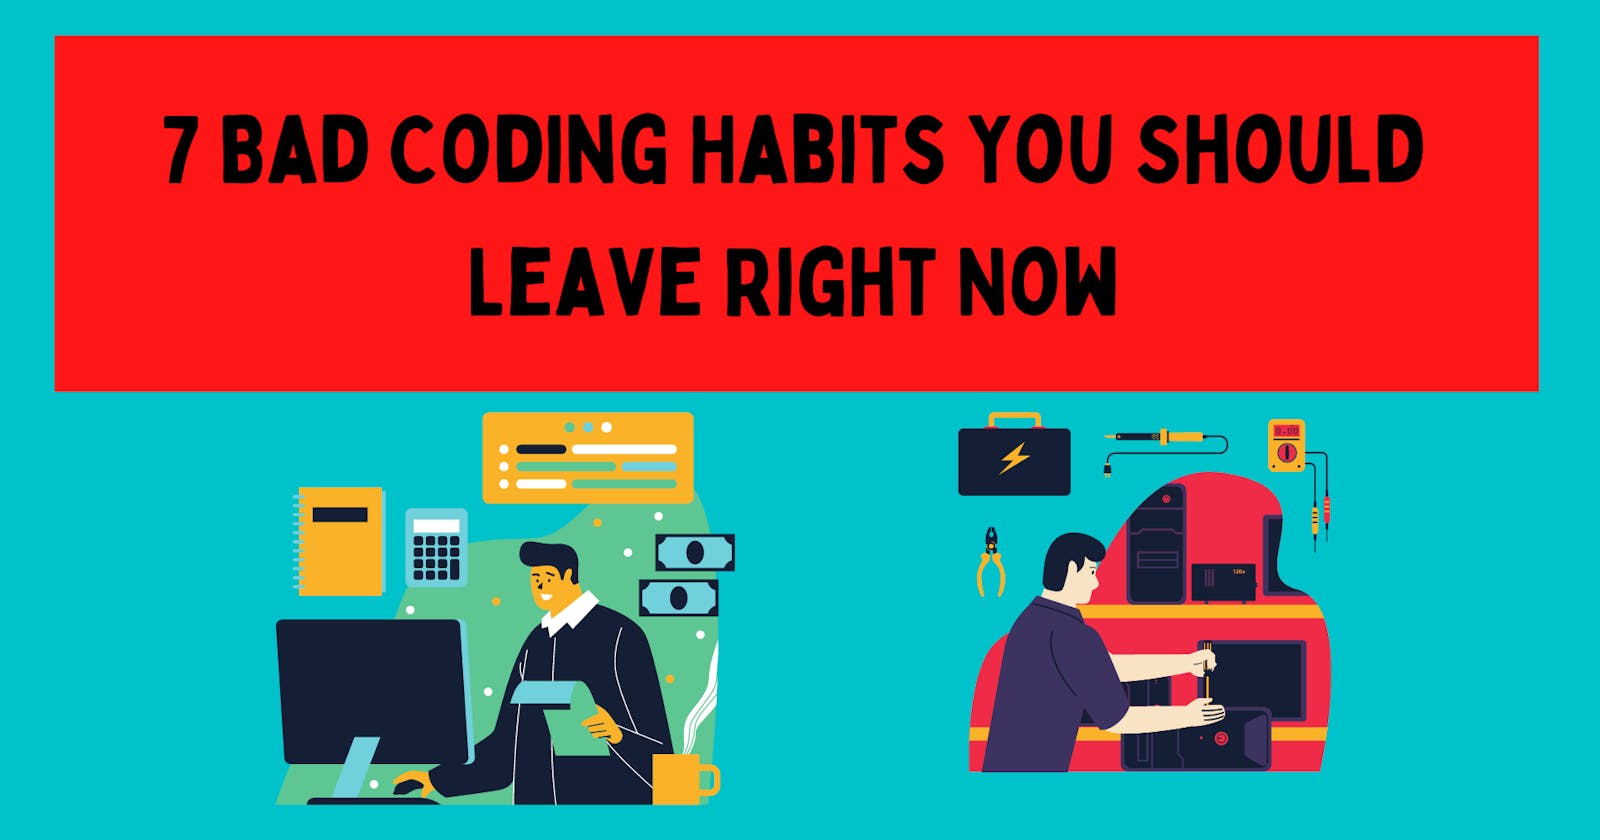 7 Bad Coding Habits You Should Leave Right Now